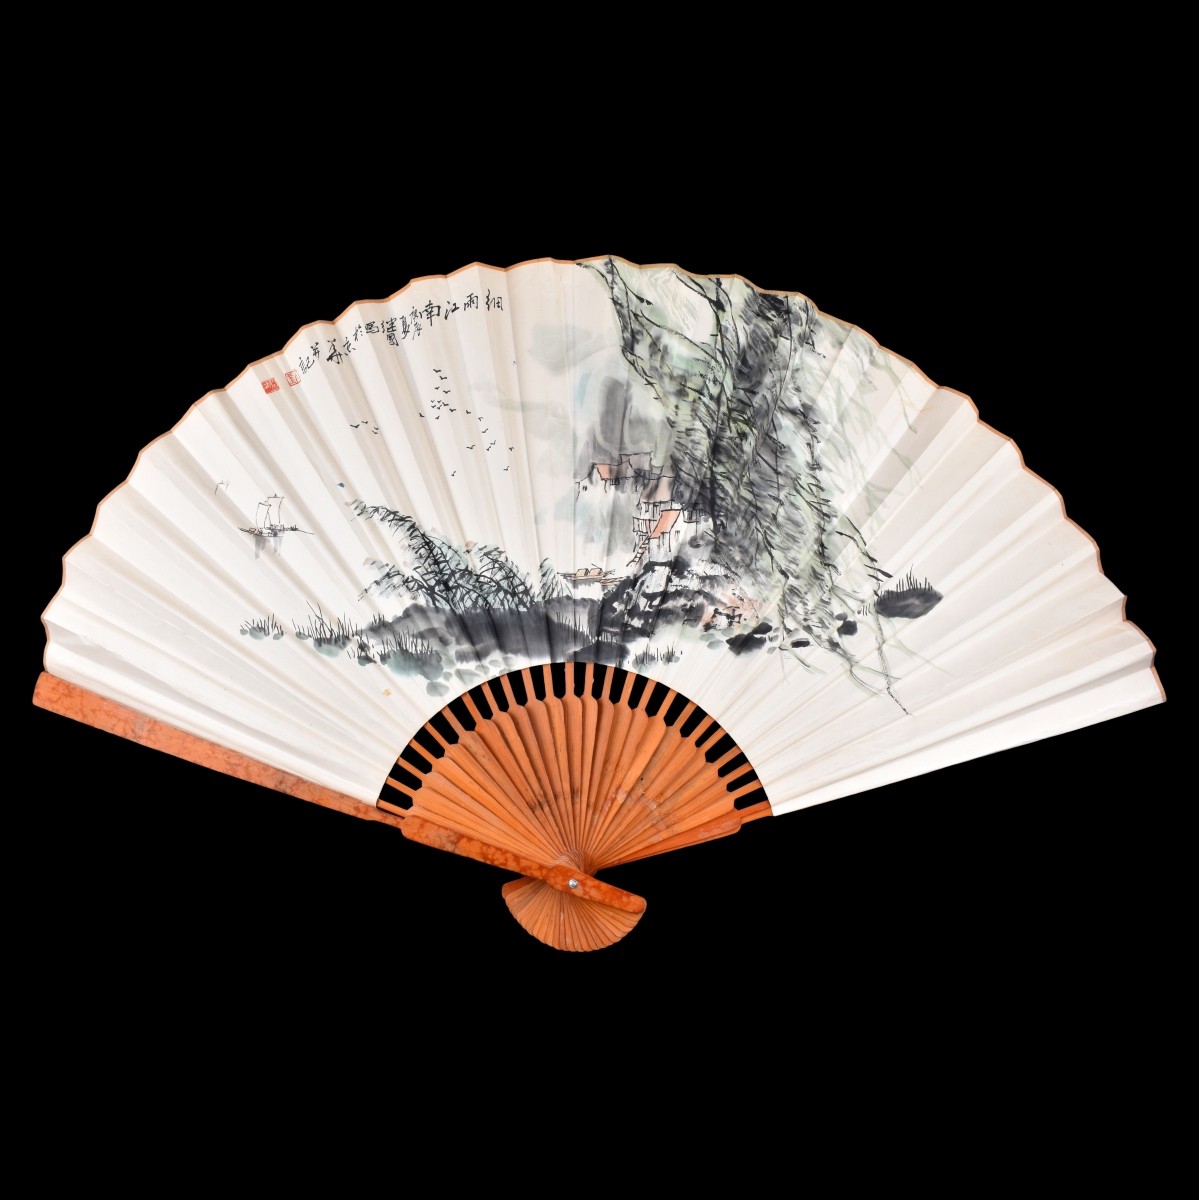 Vintage Handpainted Chinese Fan | Kodner Auctions